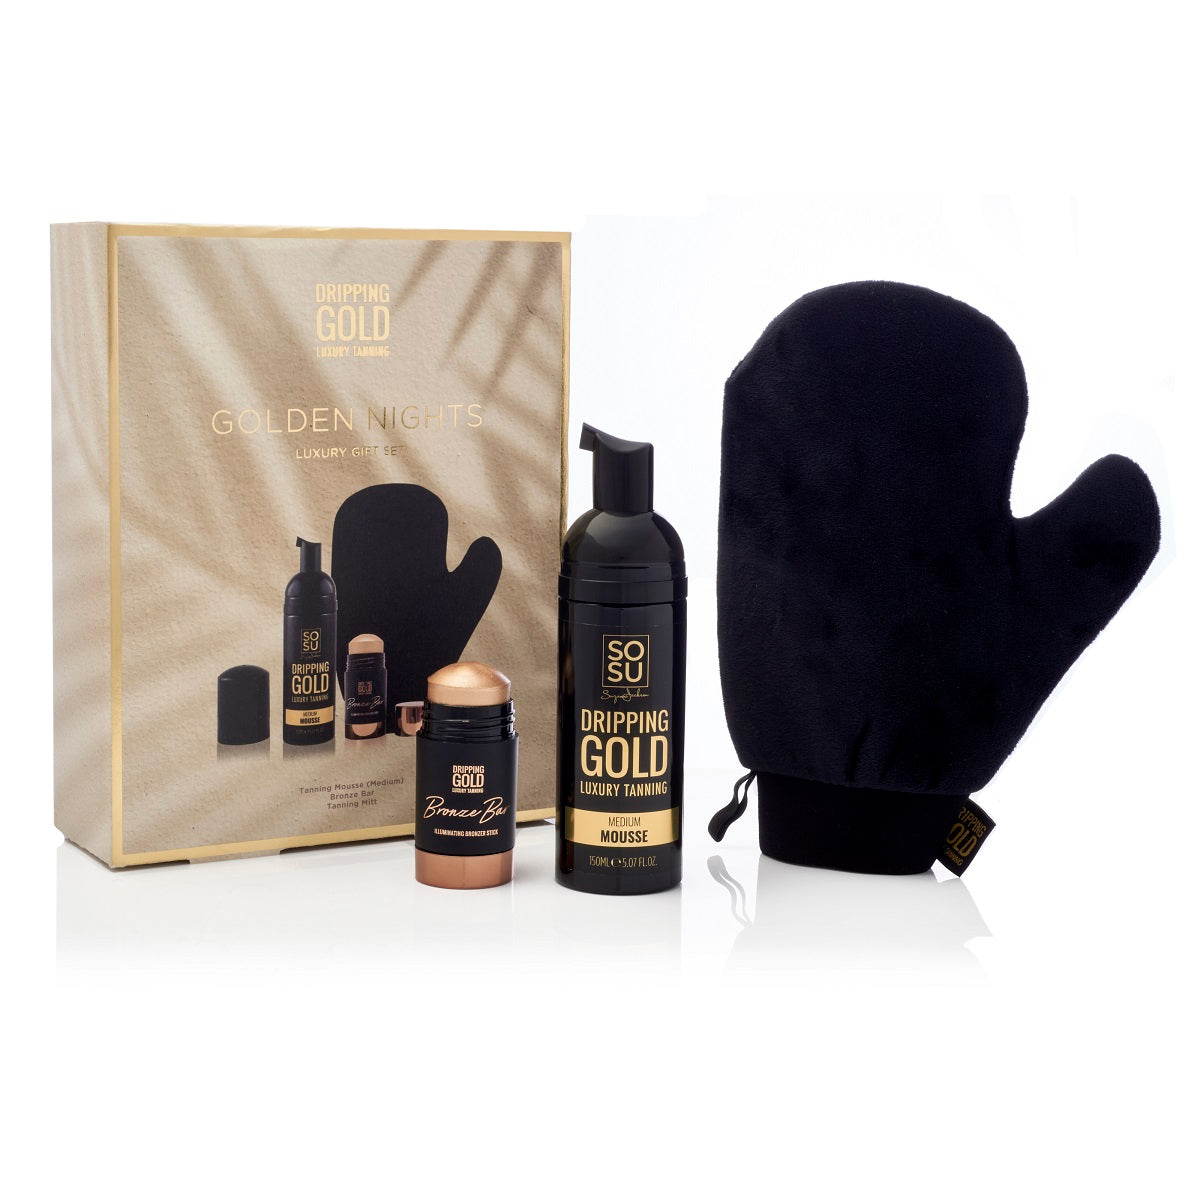 Dripping Gold Golden Nights Tanning Gift Set. 20% OFF